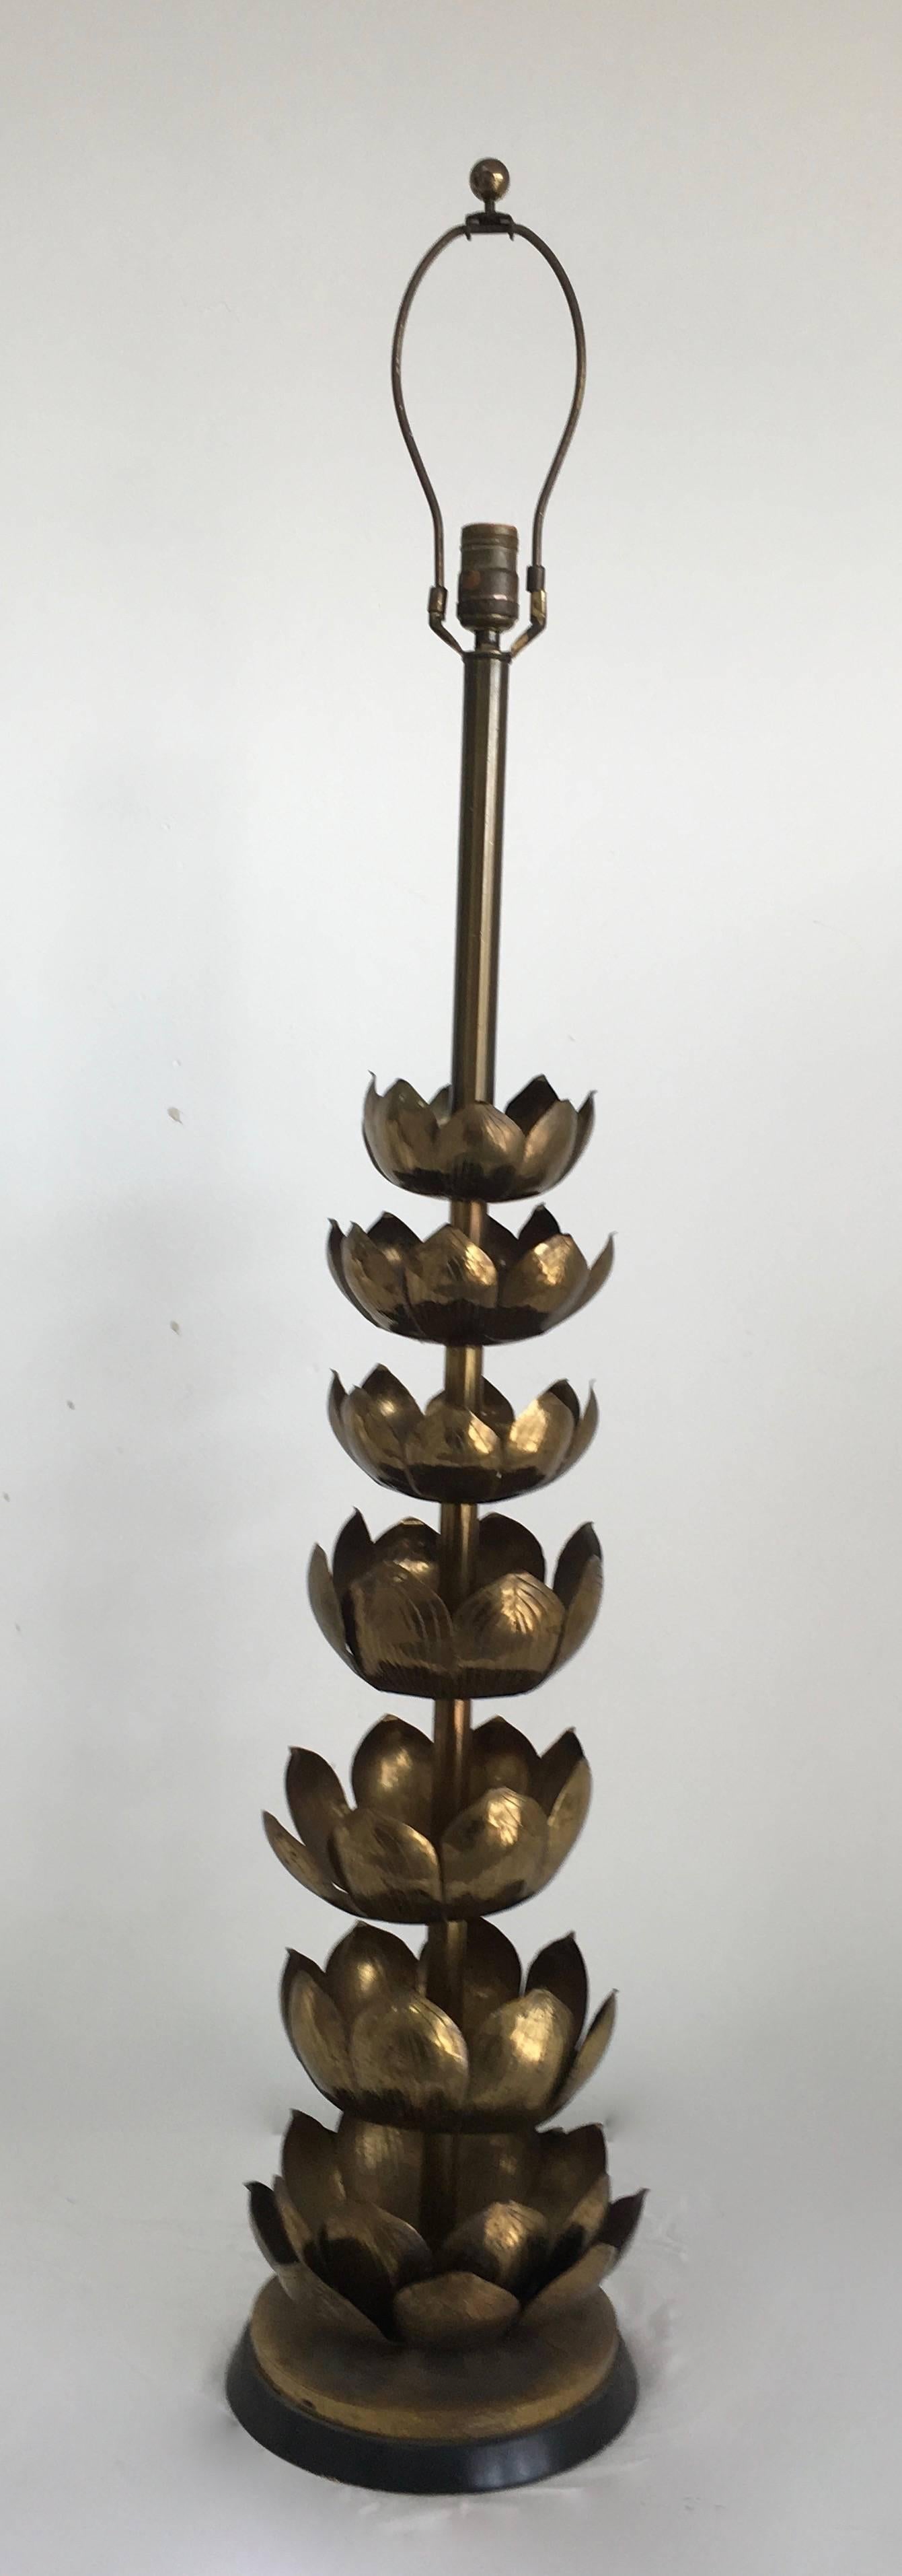 The Feldman brass lotus lamp floats seven-tiers of Lotus creating a lamp that not only stands on it's own, but can be utilized on a table or shelf, yet can also be used as a floor lamp.
Shade featured is not perfectly fitted, but we can customize